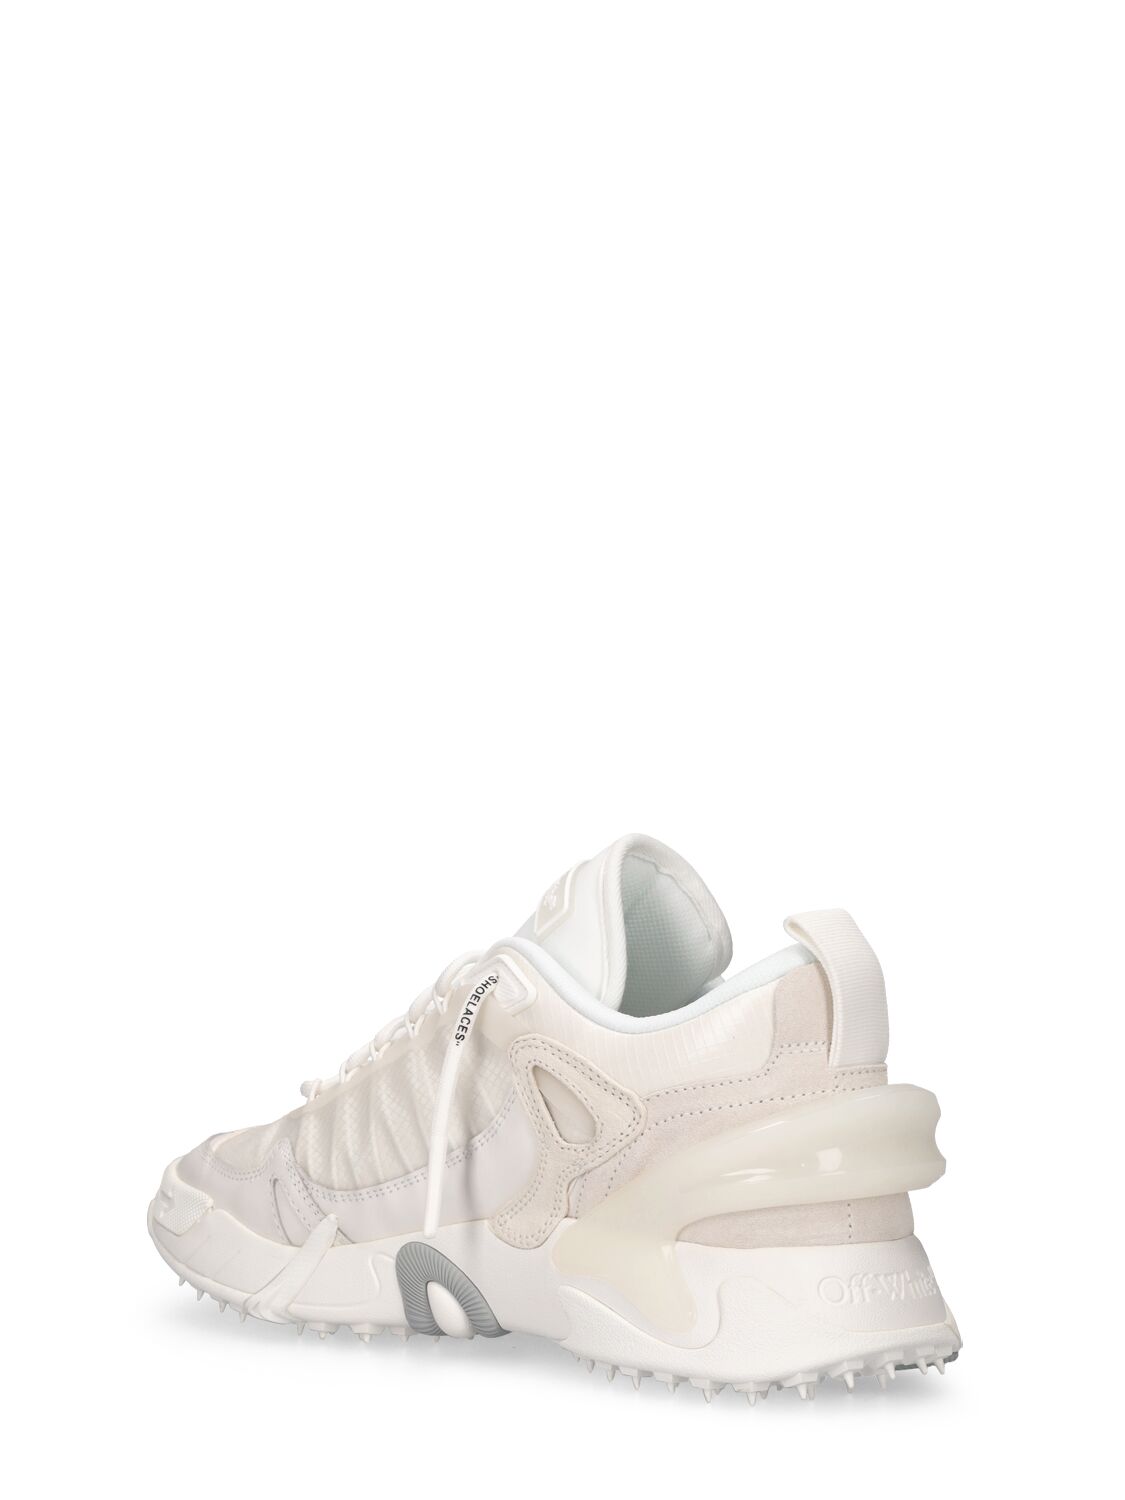 Shop Off-white Odsy-2000 Nylon Sneakers In White